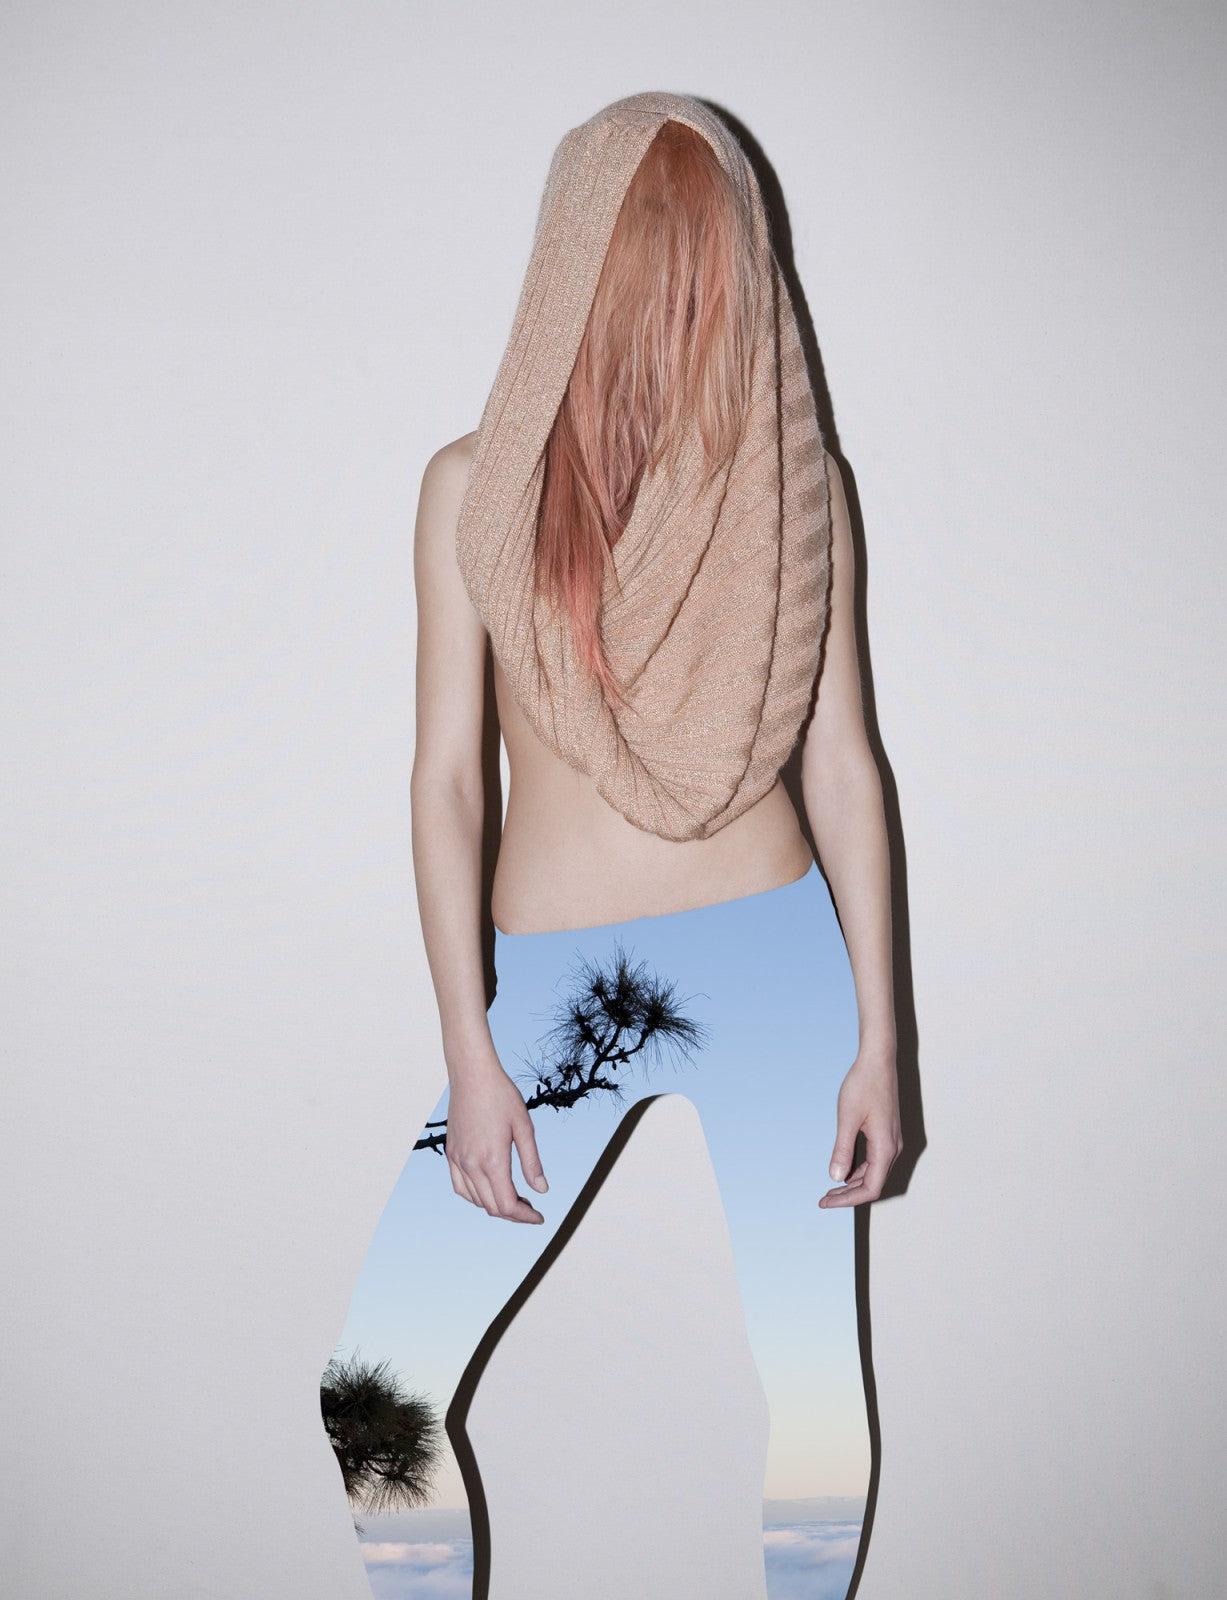 Viviane Sassen In and Out of Fashion